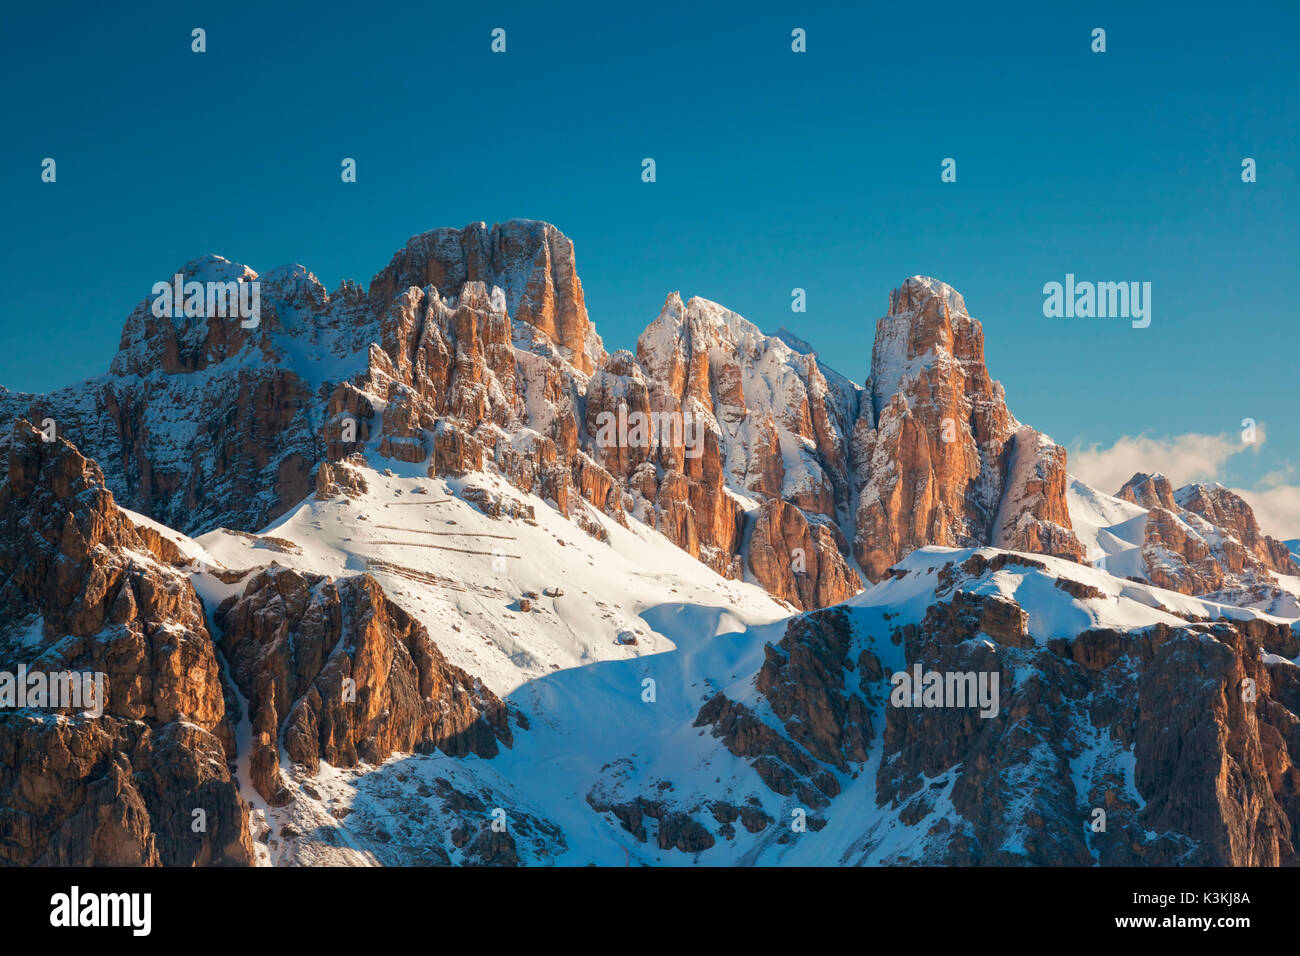 The Group Fanis (also called Group of Fanes, Dolomites or Fanis - German Fanis-Gruppe) is a mountain massif located in the Dolomites, between the Autonomous Province of Bolzano and the province of Belluno. Stock Photo